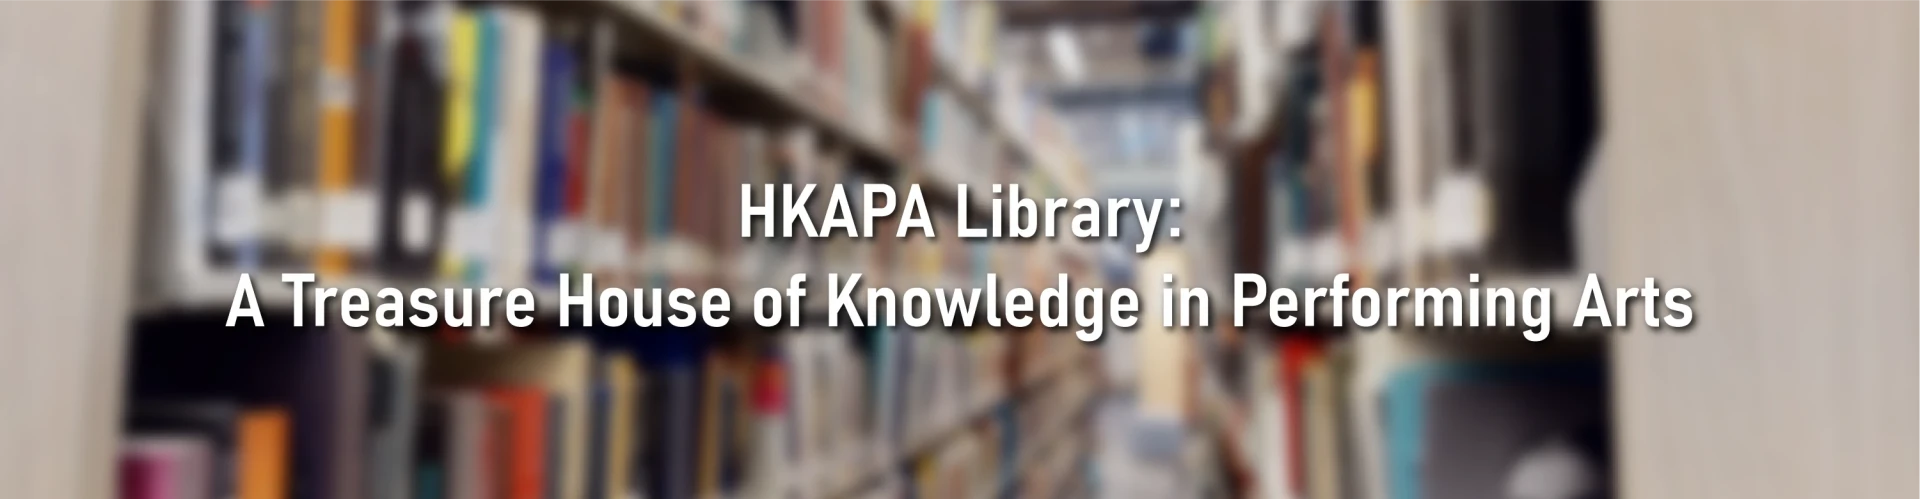 HKAPA Library:  A Treasure House of Knowledge in Performing Arts